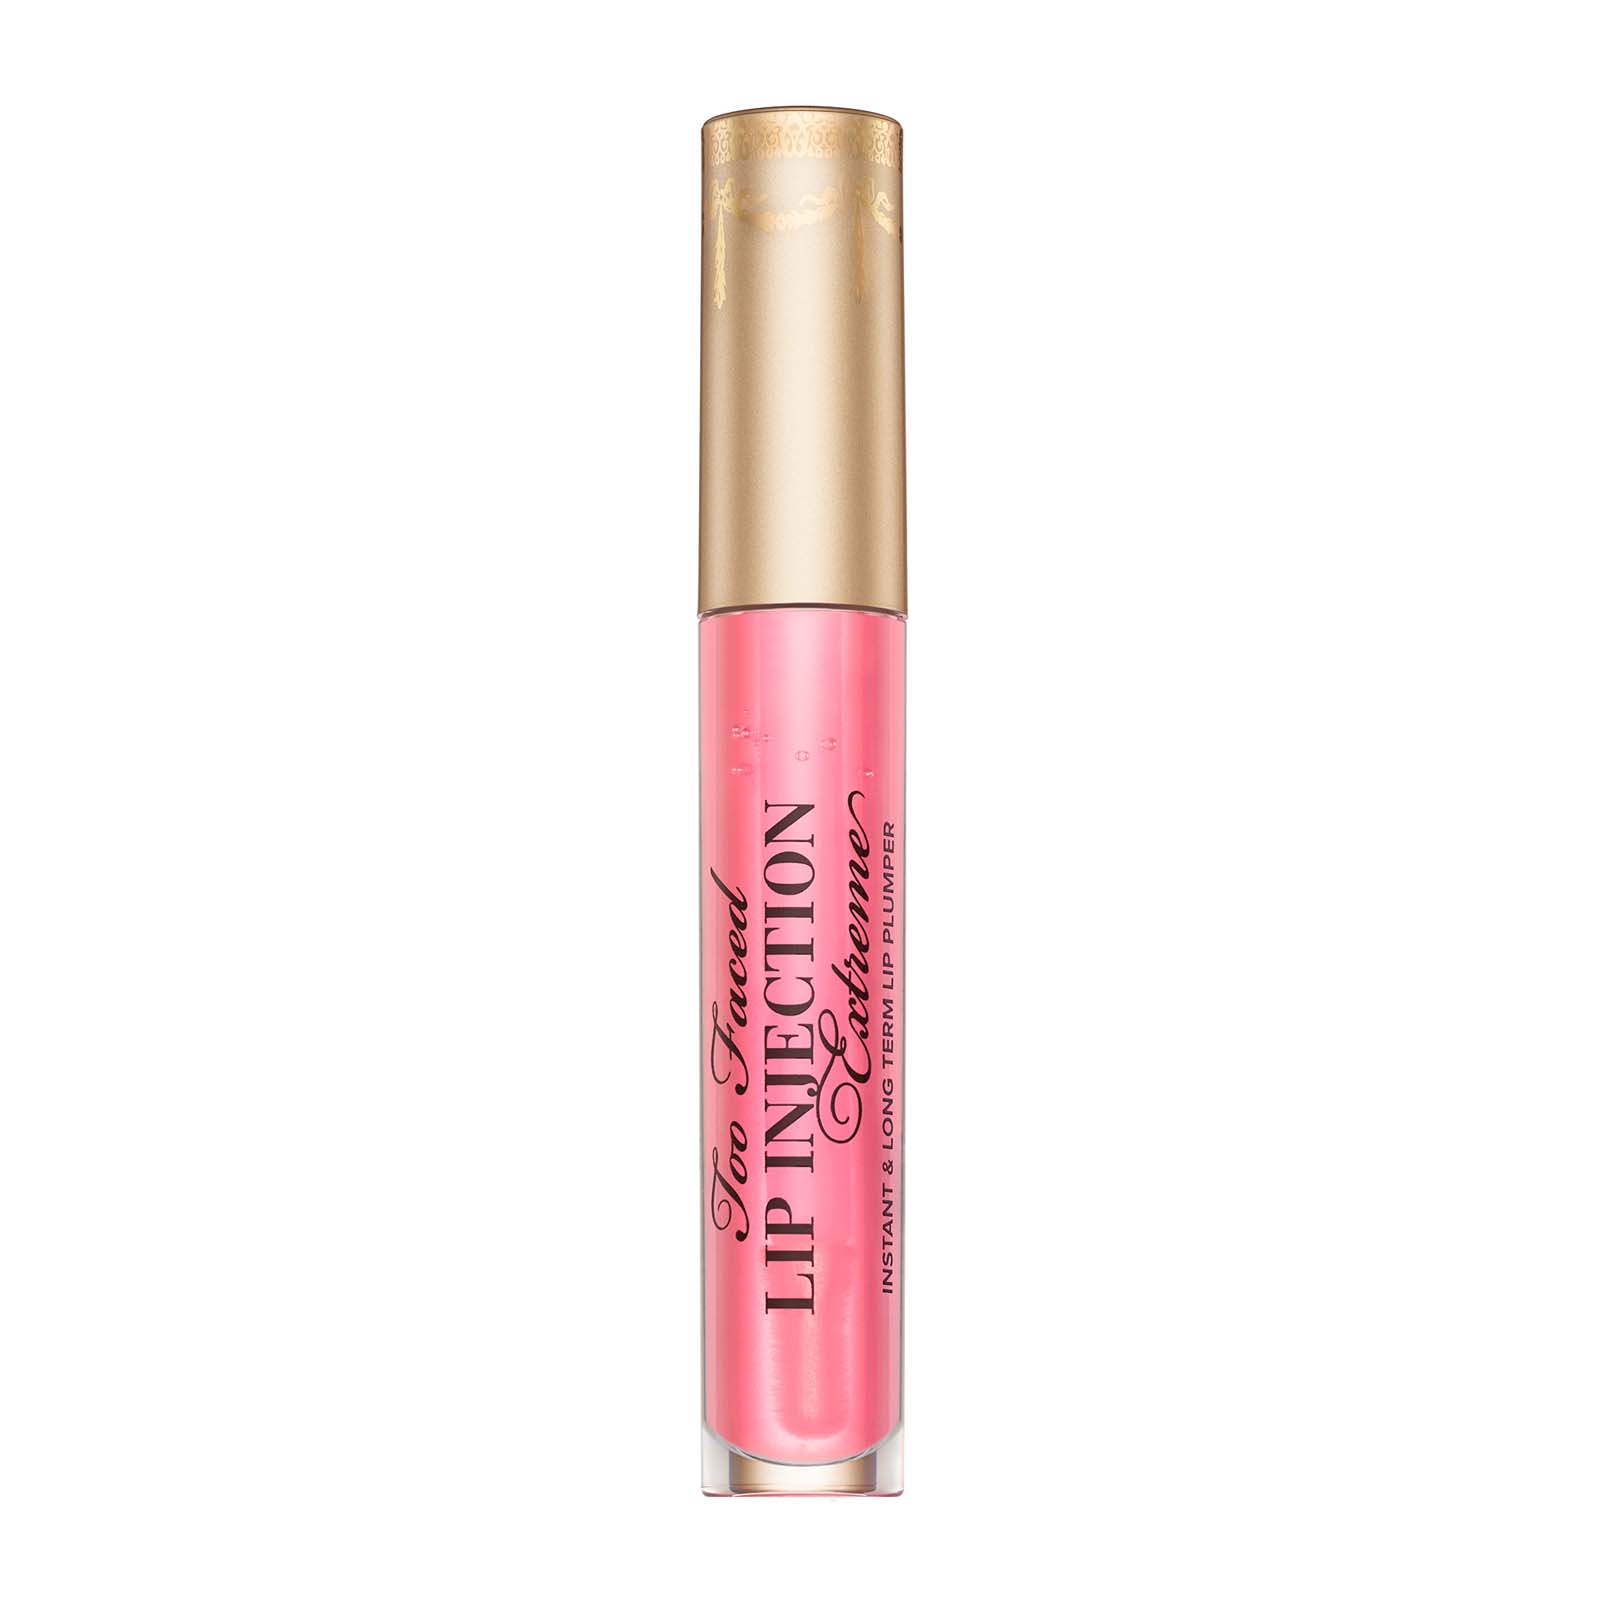 Too Faced Lip Injection Extreme Plumping Lip Gloss 4Ml Bubblegum Yum